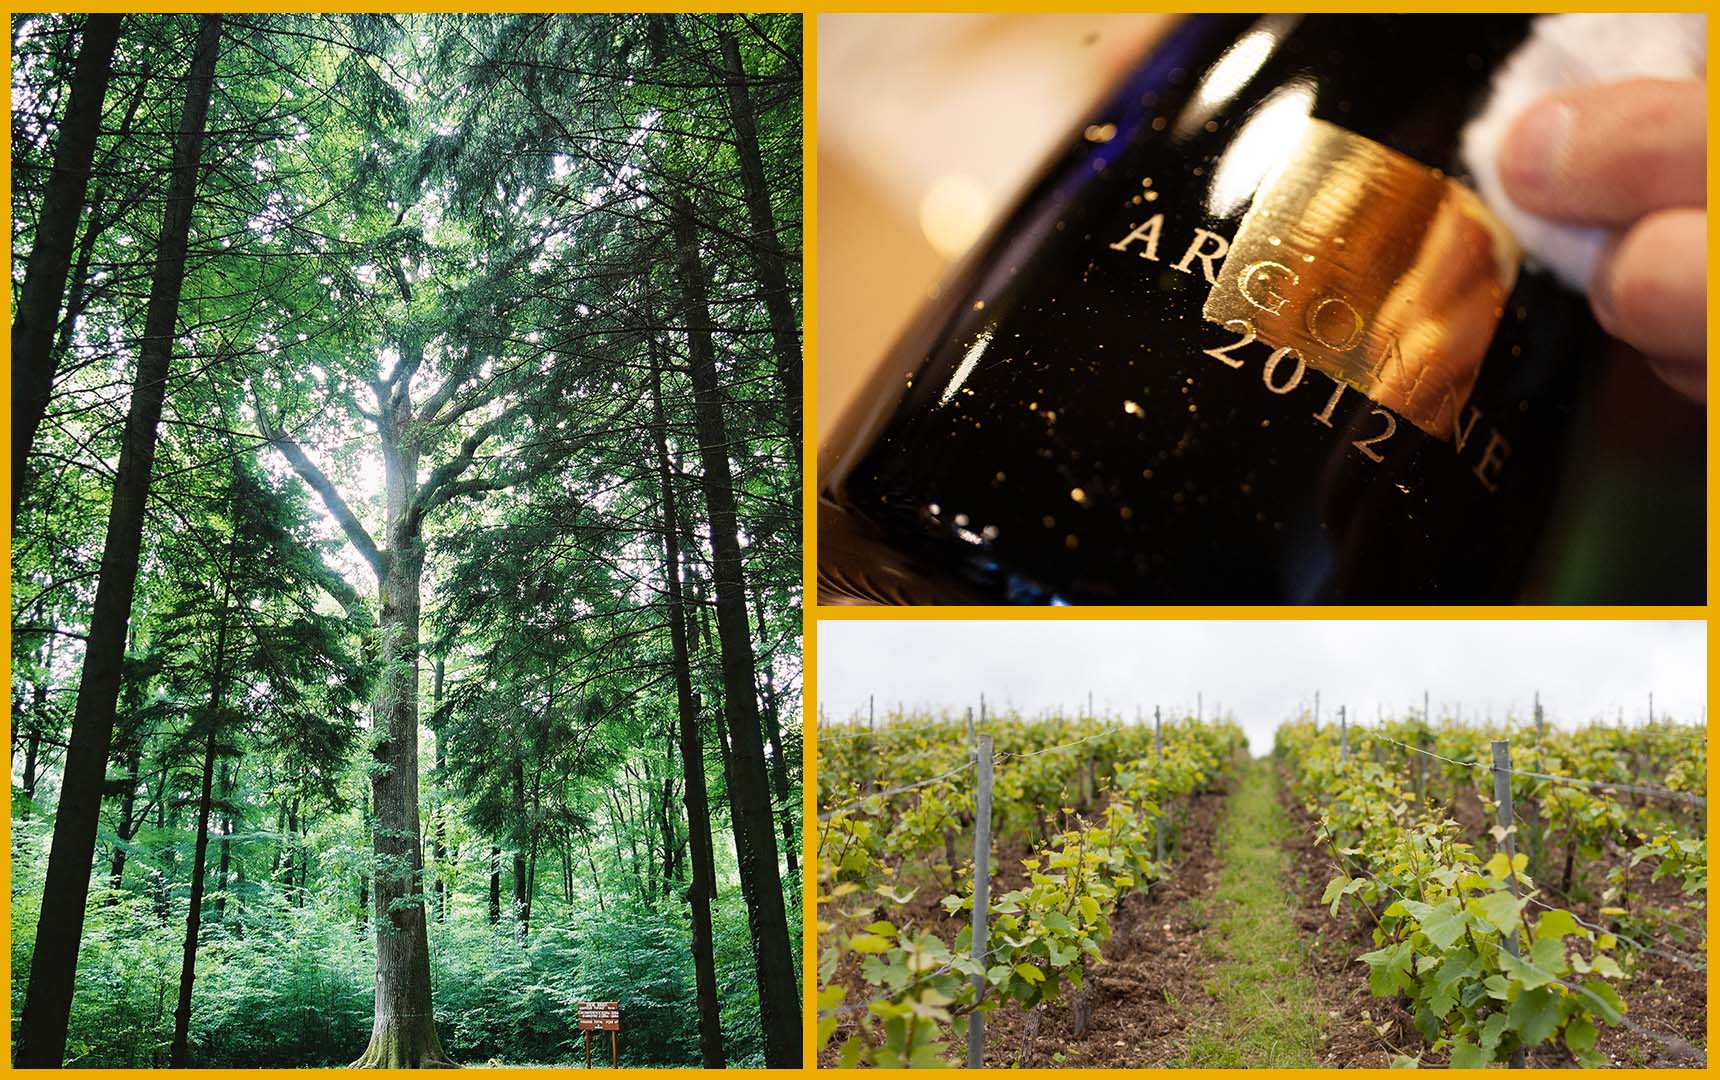 L-R: Oaks in the Argonne Forest, a bottle of 2012 Argonne Cuvée with gold foil, grapevines at Henri Giraud.